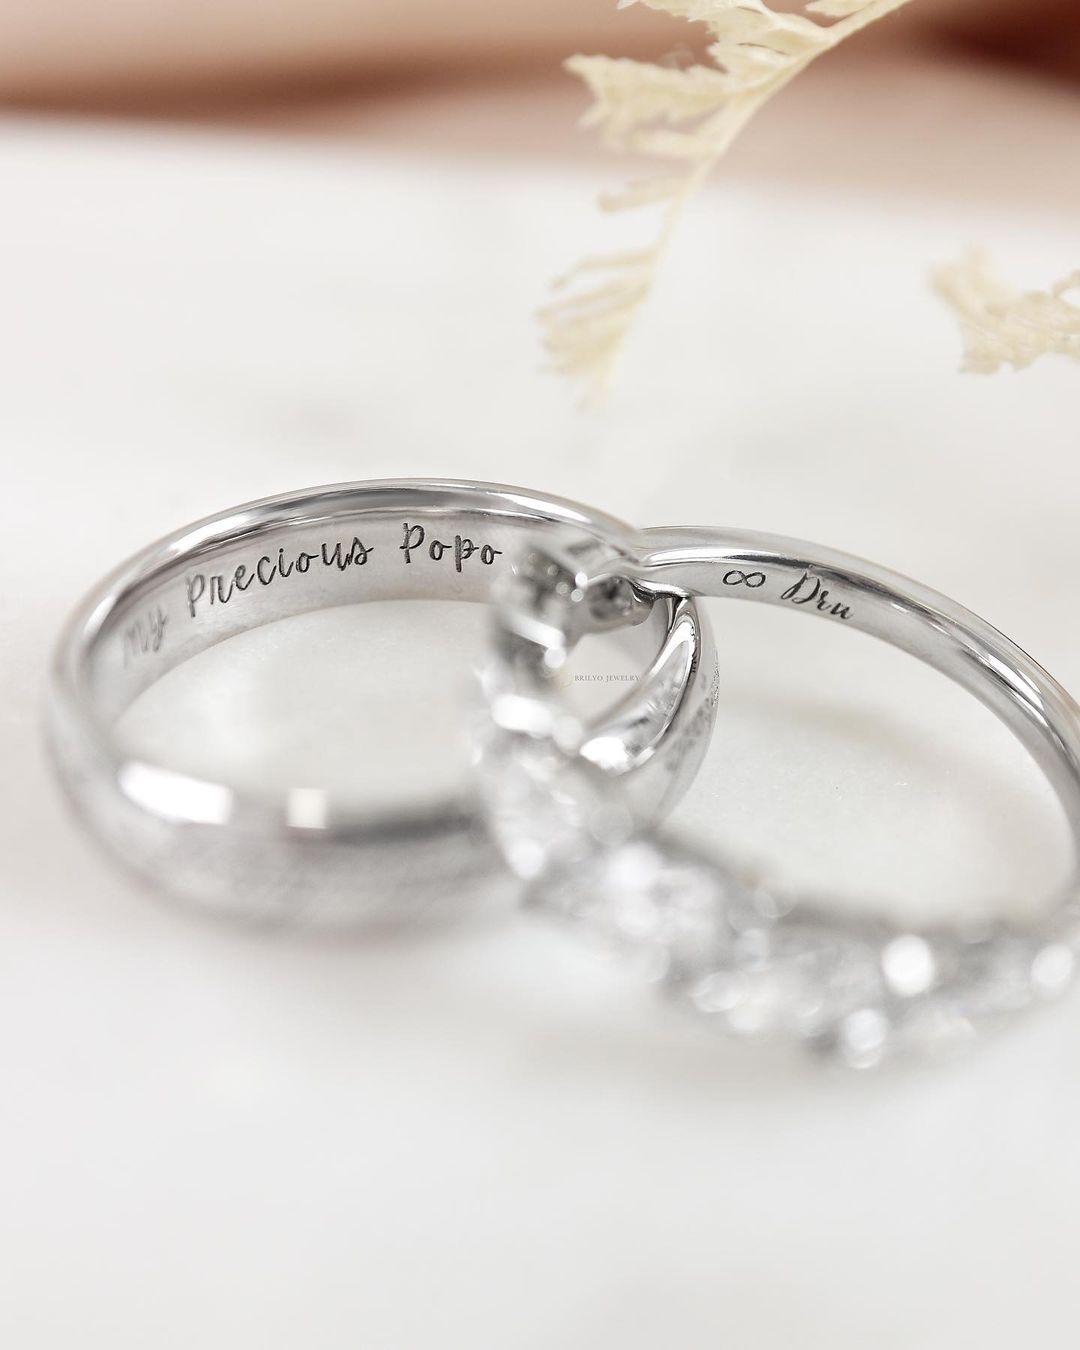 Wedding Rings with a Lord of the Rings Engraving | Brilyo Jewelry